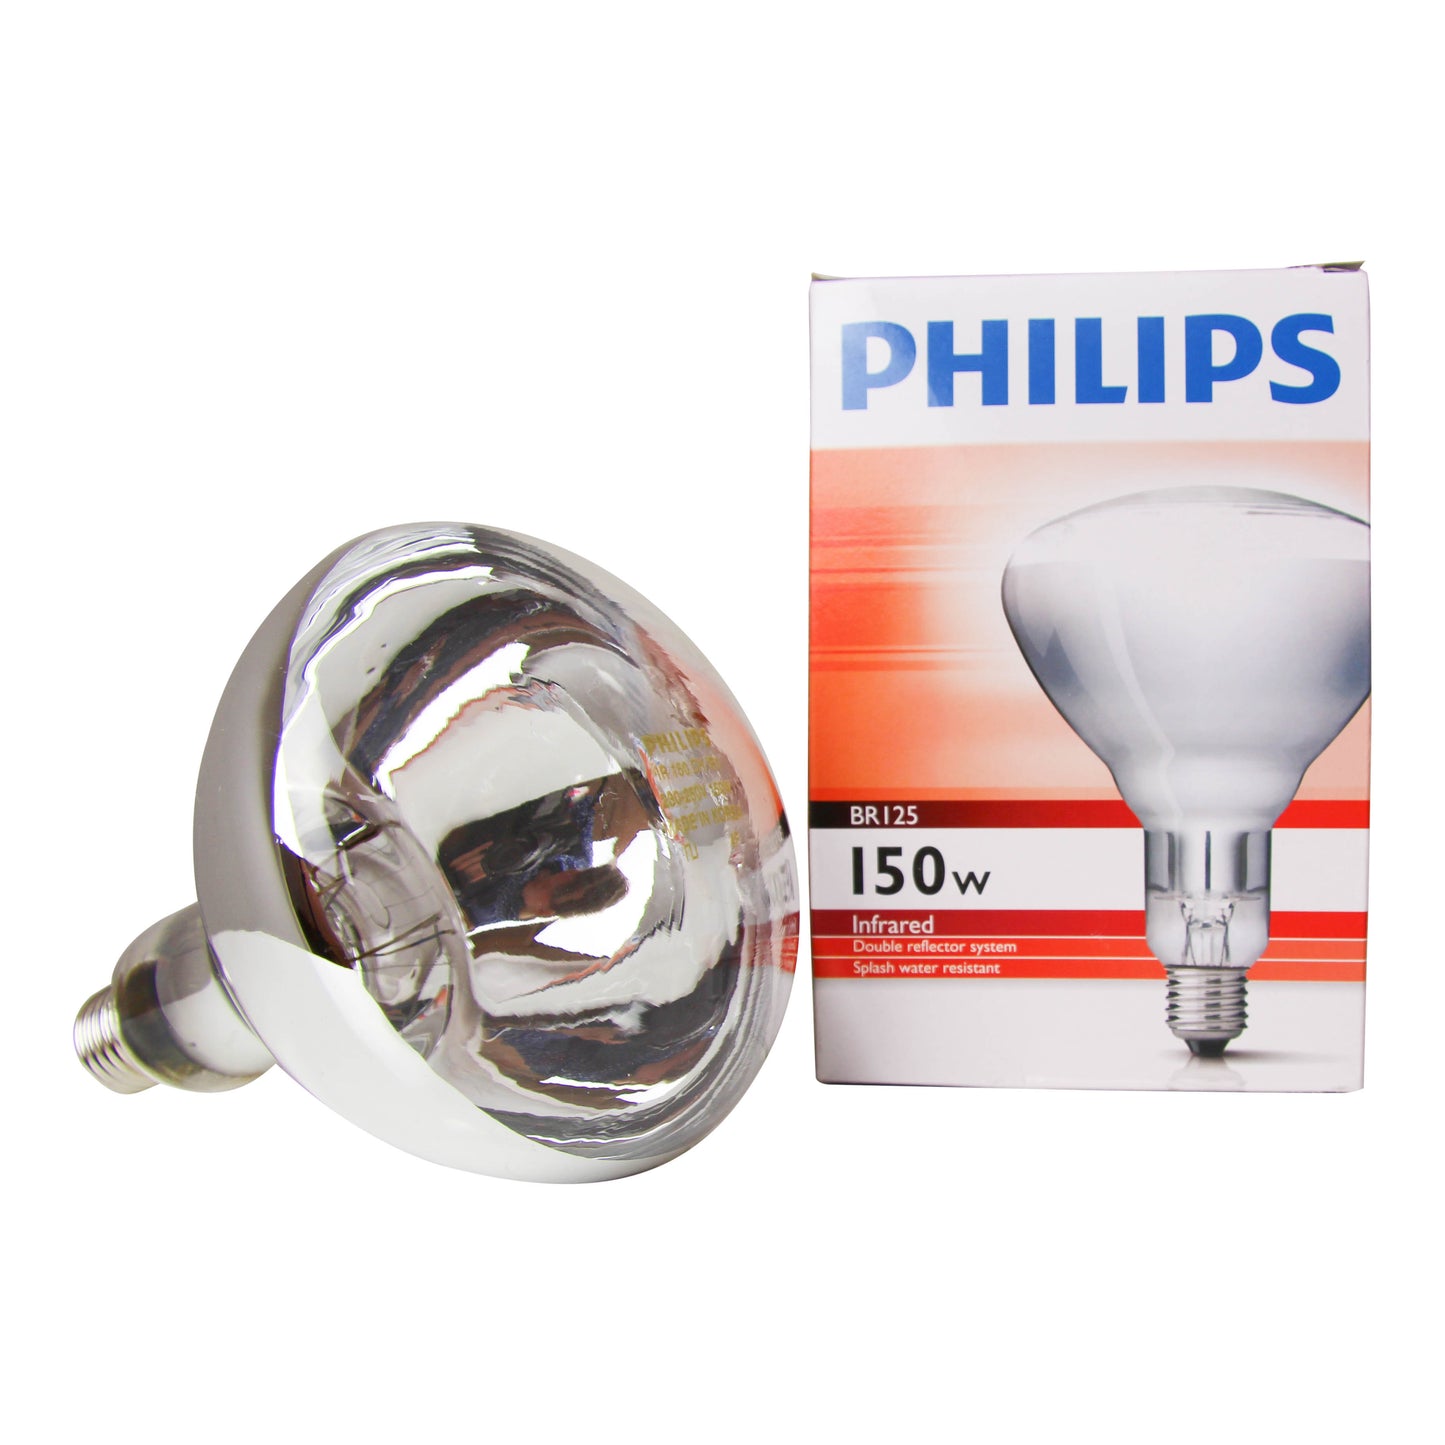 Philips BR125 IR Infra-Red 150W Clear Bulb